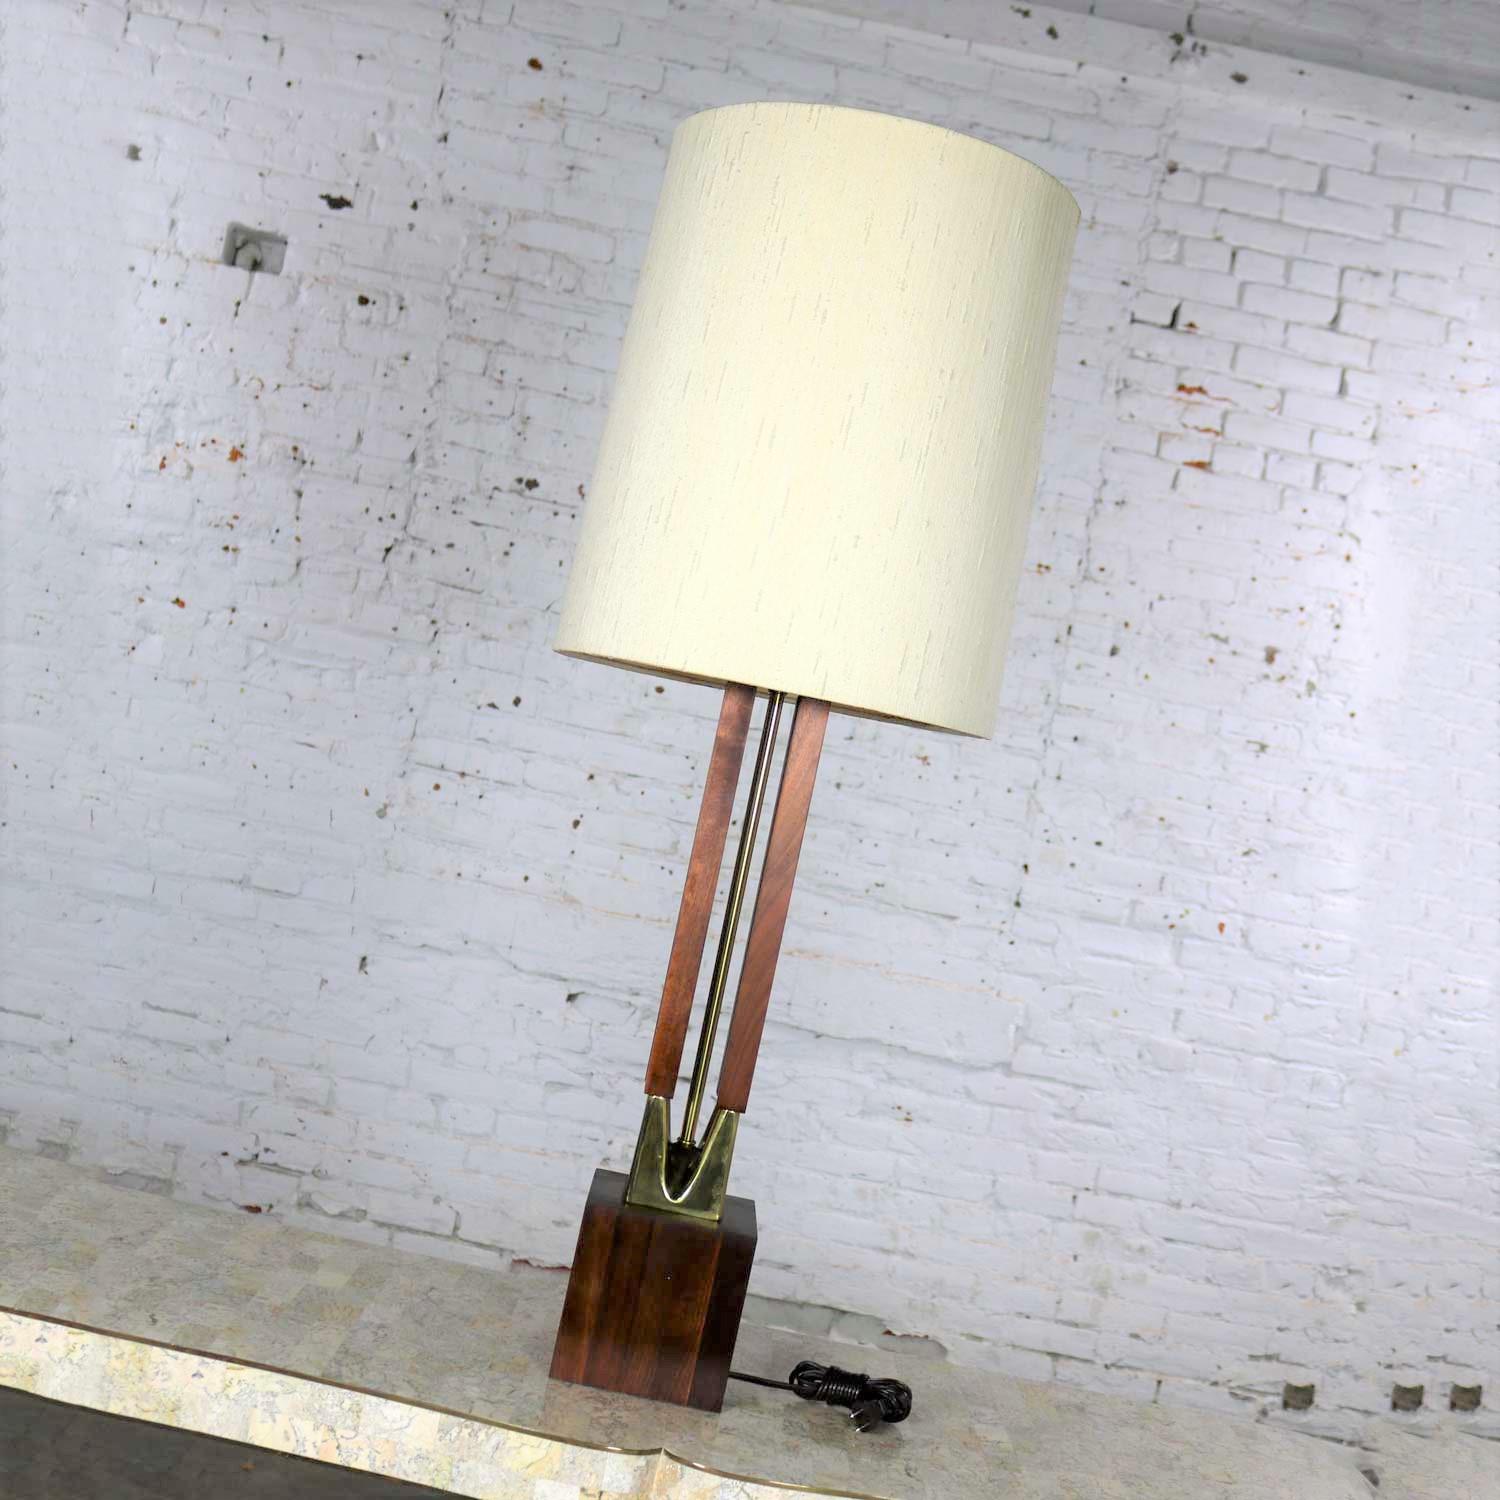 20th Century Mid-Century Modern Large Scale Walnut & Brass Lamp Attributed to Laurel Lamp Mfg For Sale